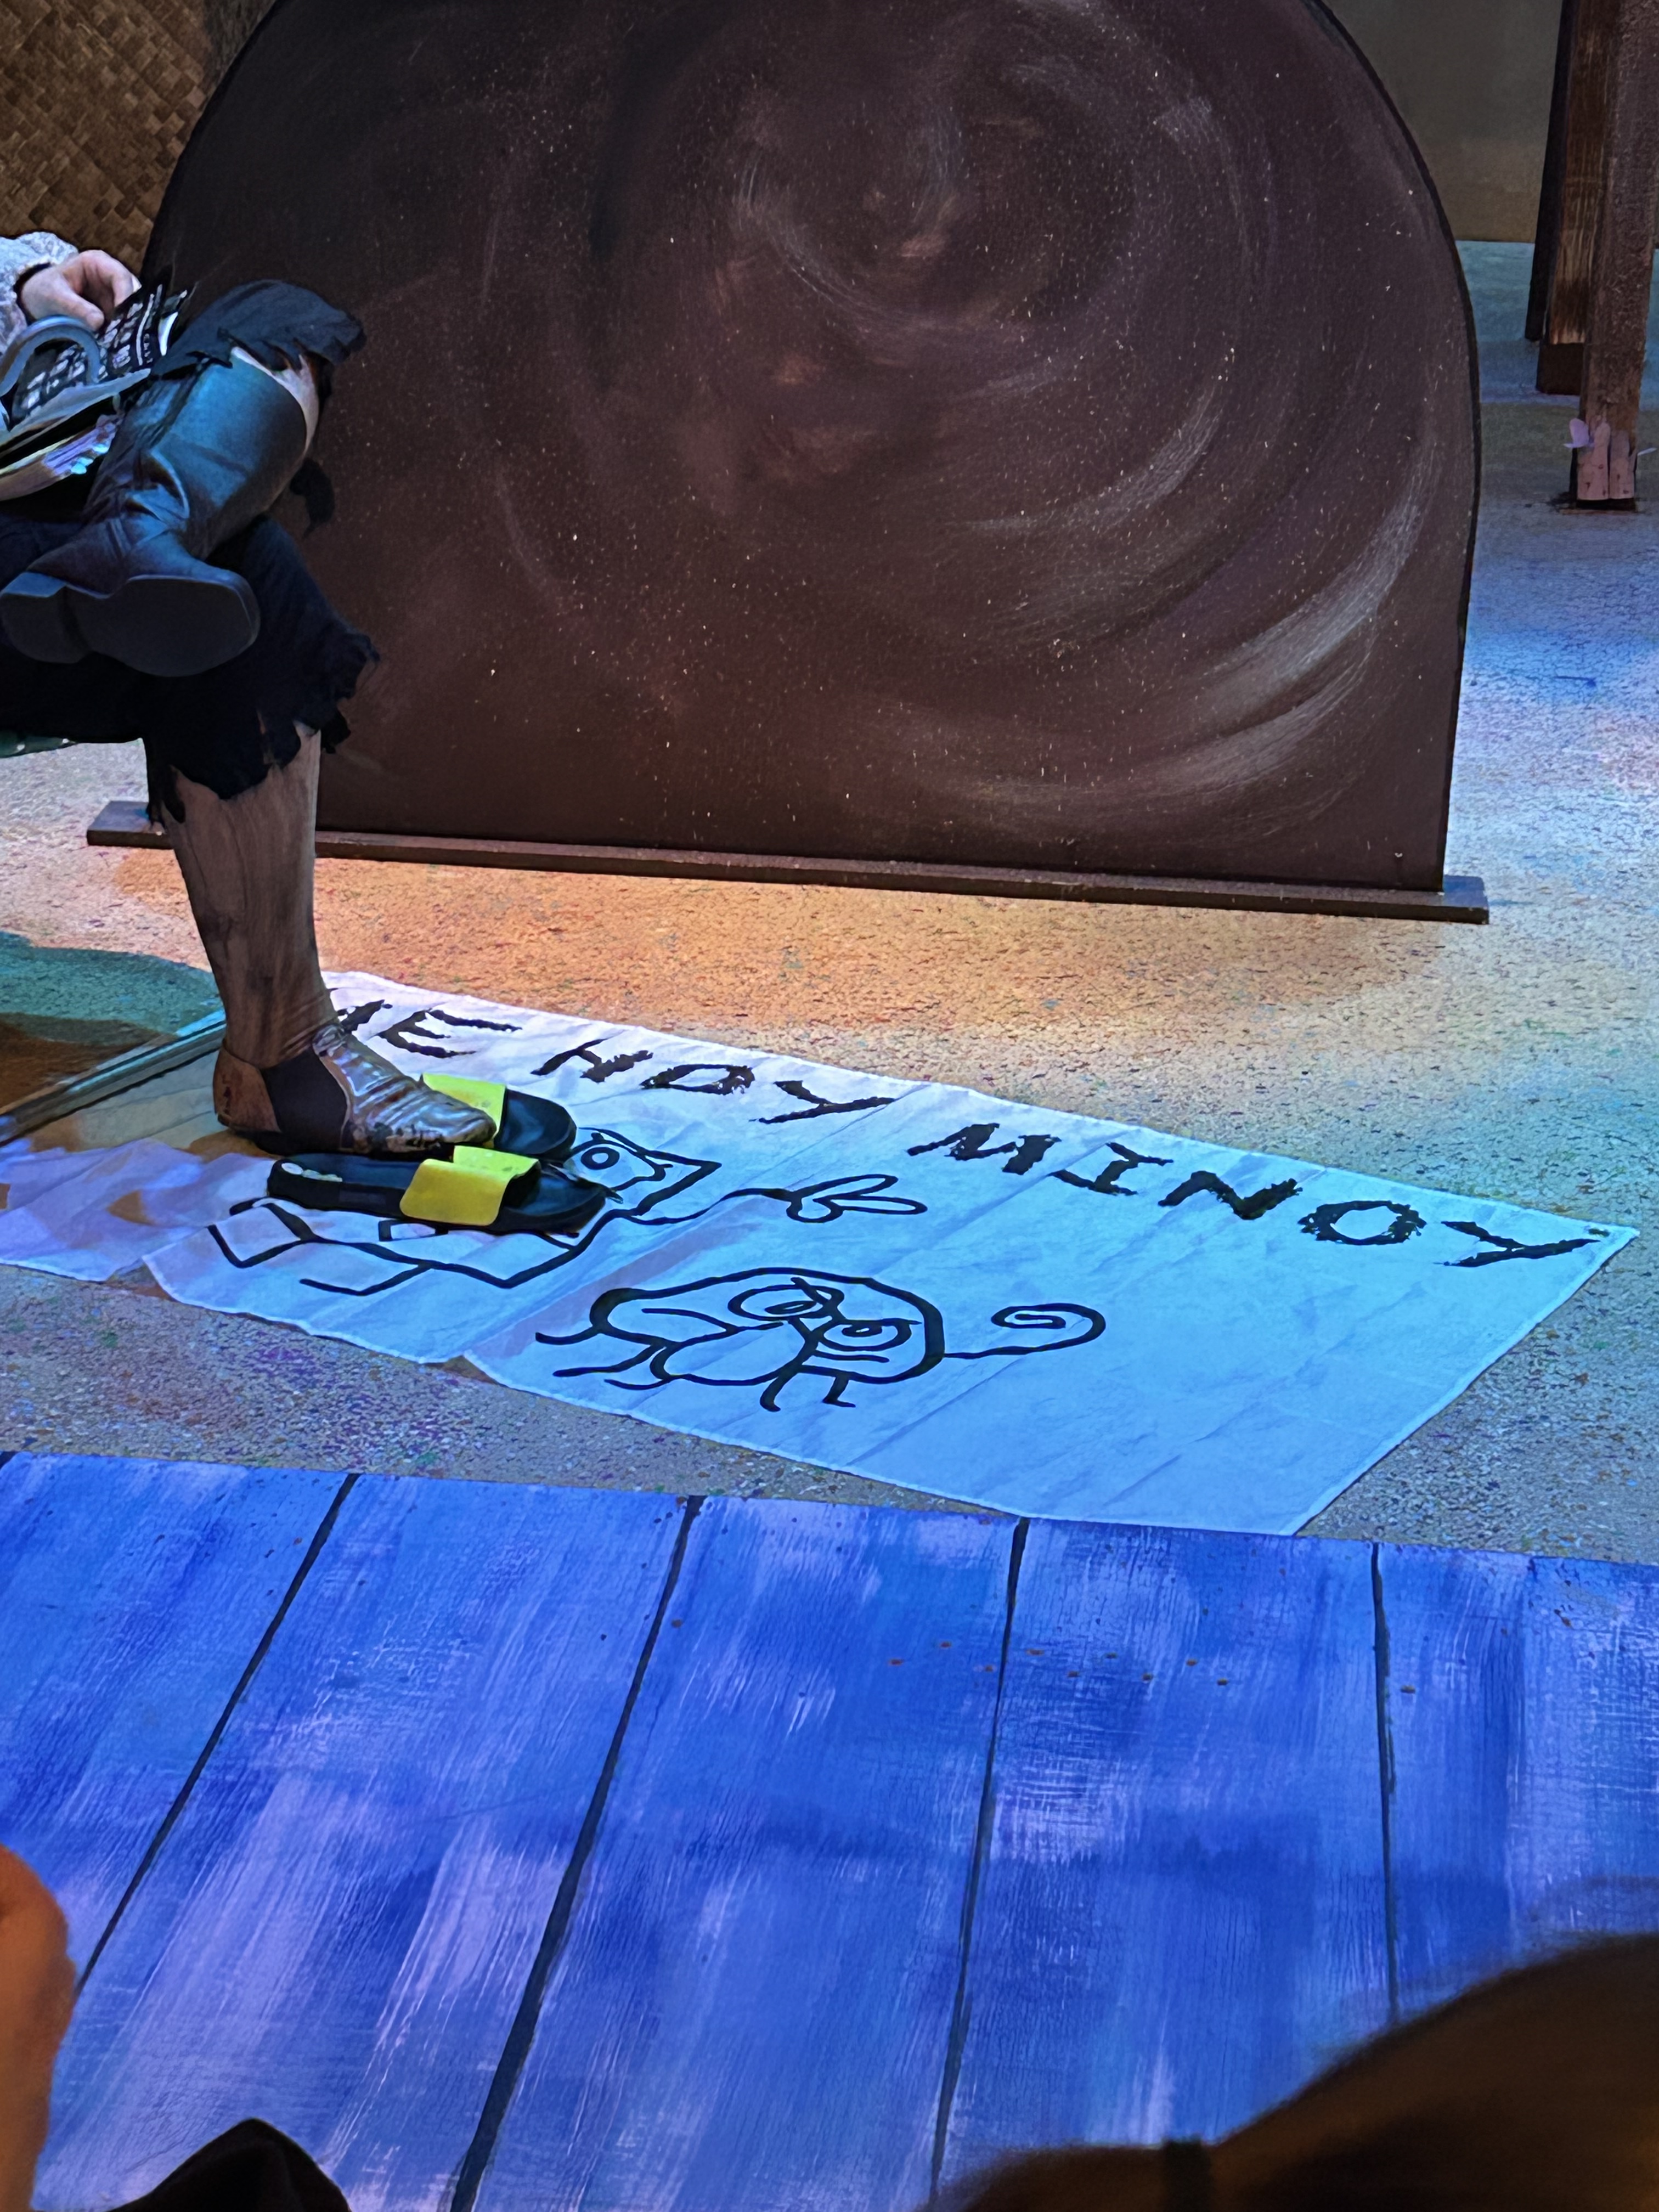 A towel on the stage at Lyric Arts in Anoka for "The SpongeBob Musical" that says "Me Hoy Minoy"